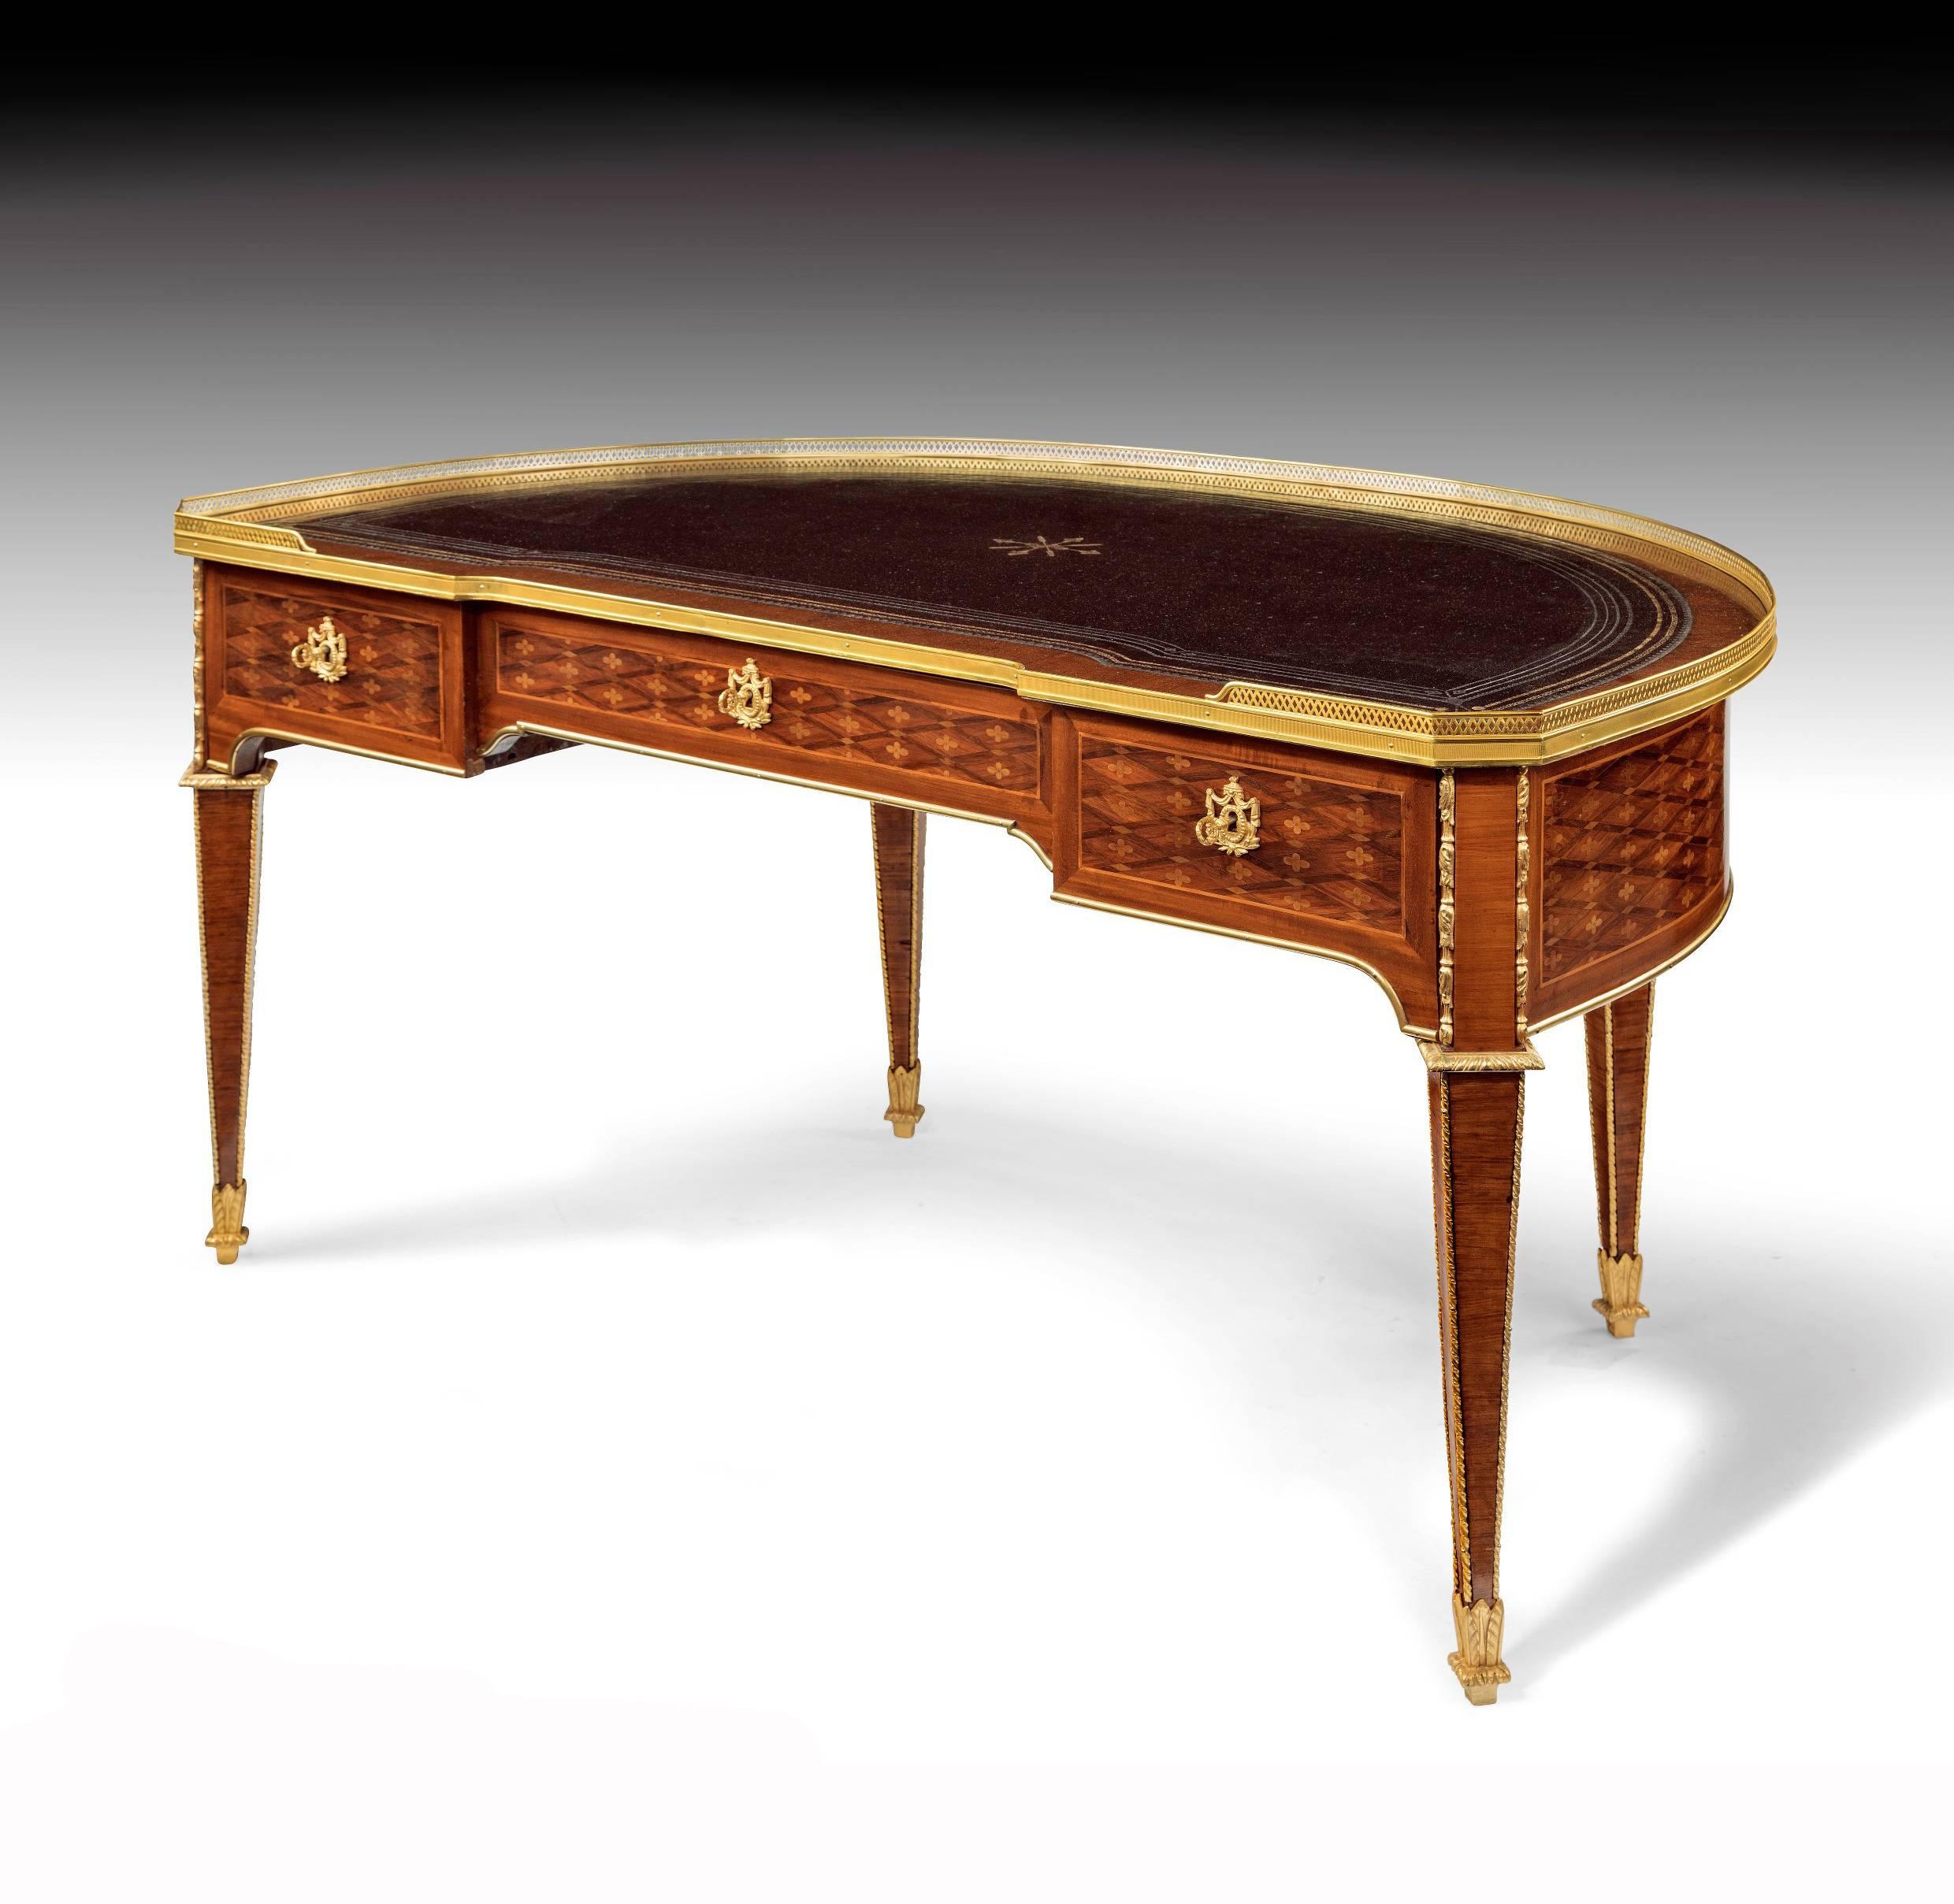 A stunning rare 19th century demilune, crescent shaped French desk in the Louis XVI style.
This delightful tulipwood late 19th century desk is one of the rarest shapes being demilune crescent shaped.
The inverted breakfront top having a gilt